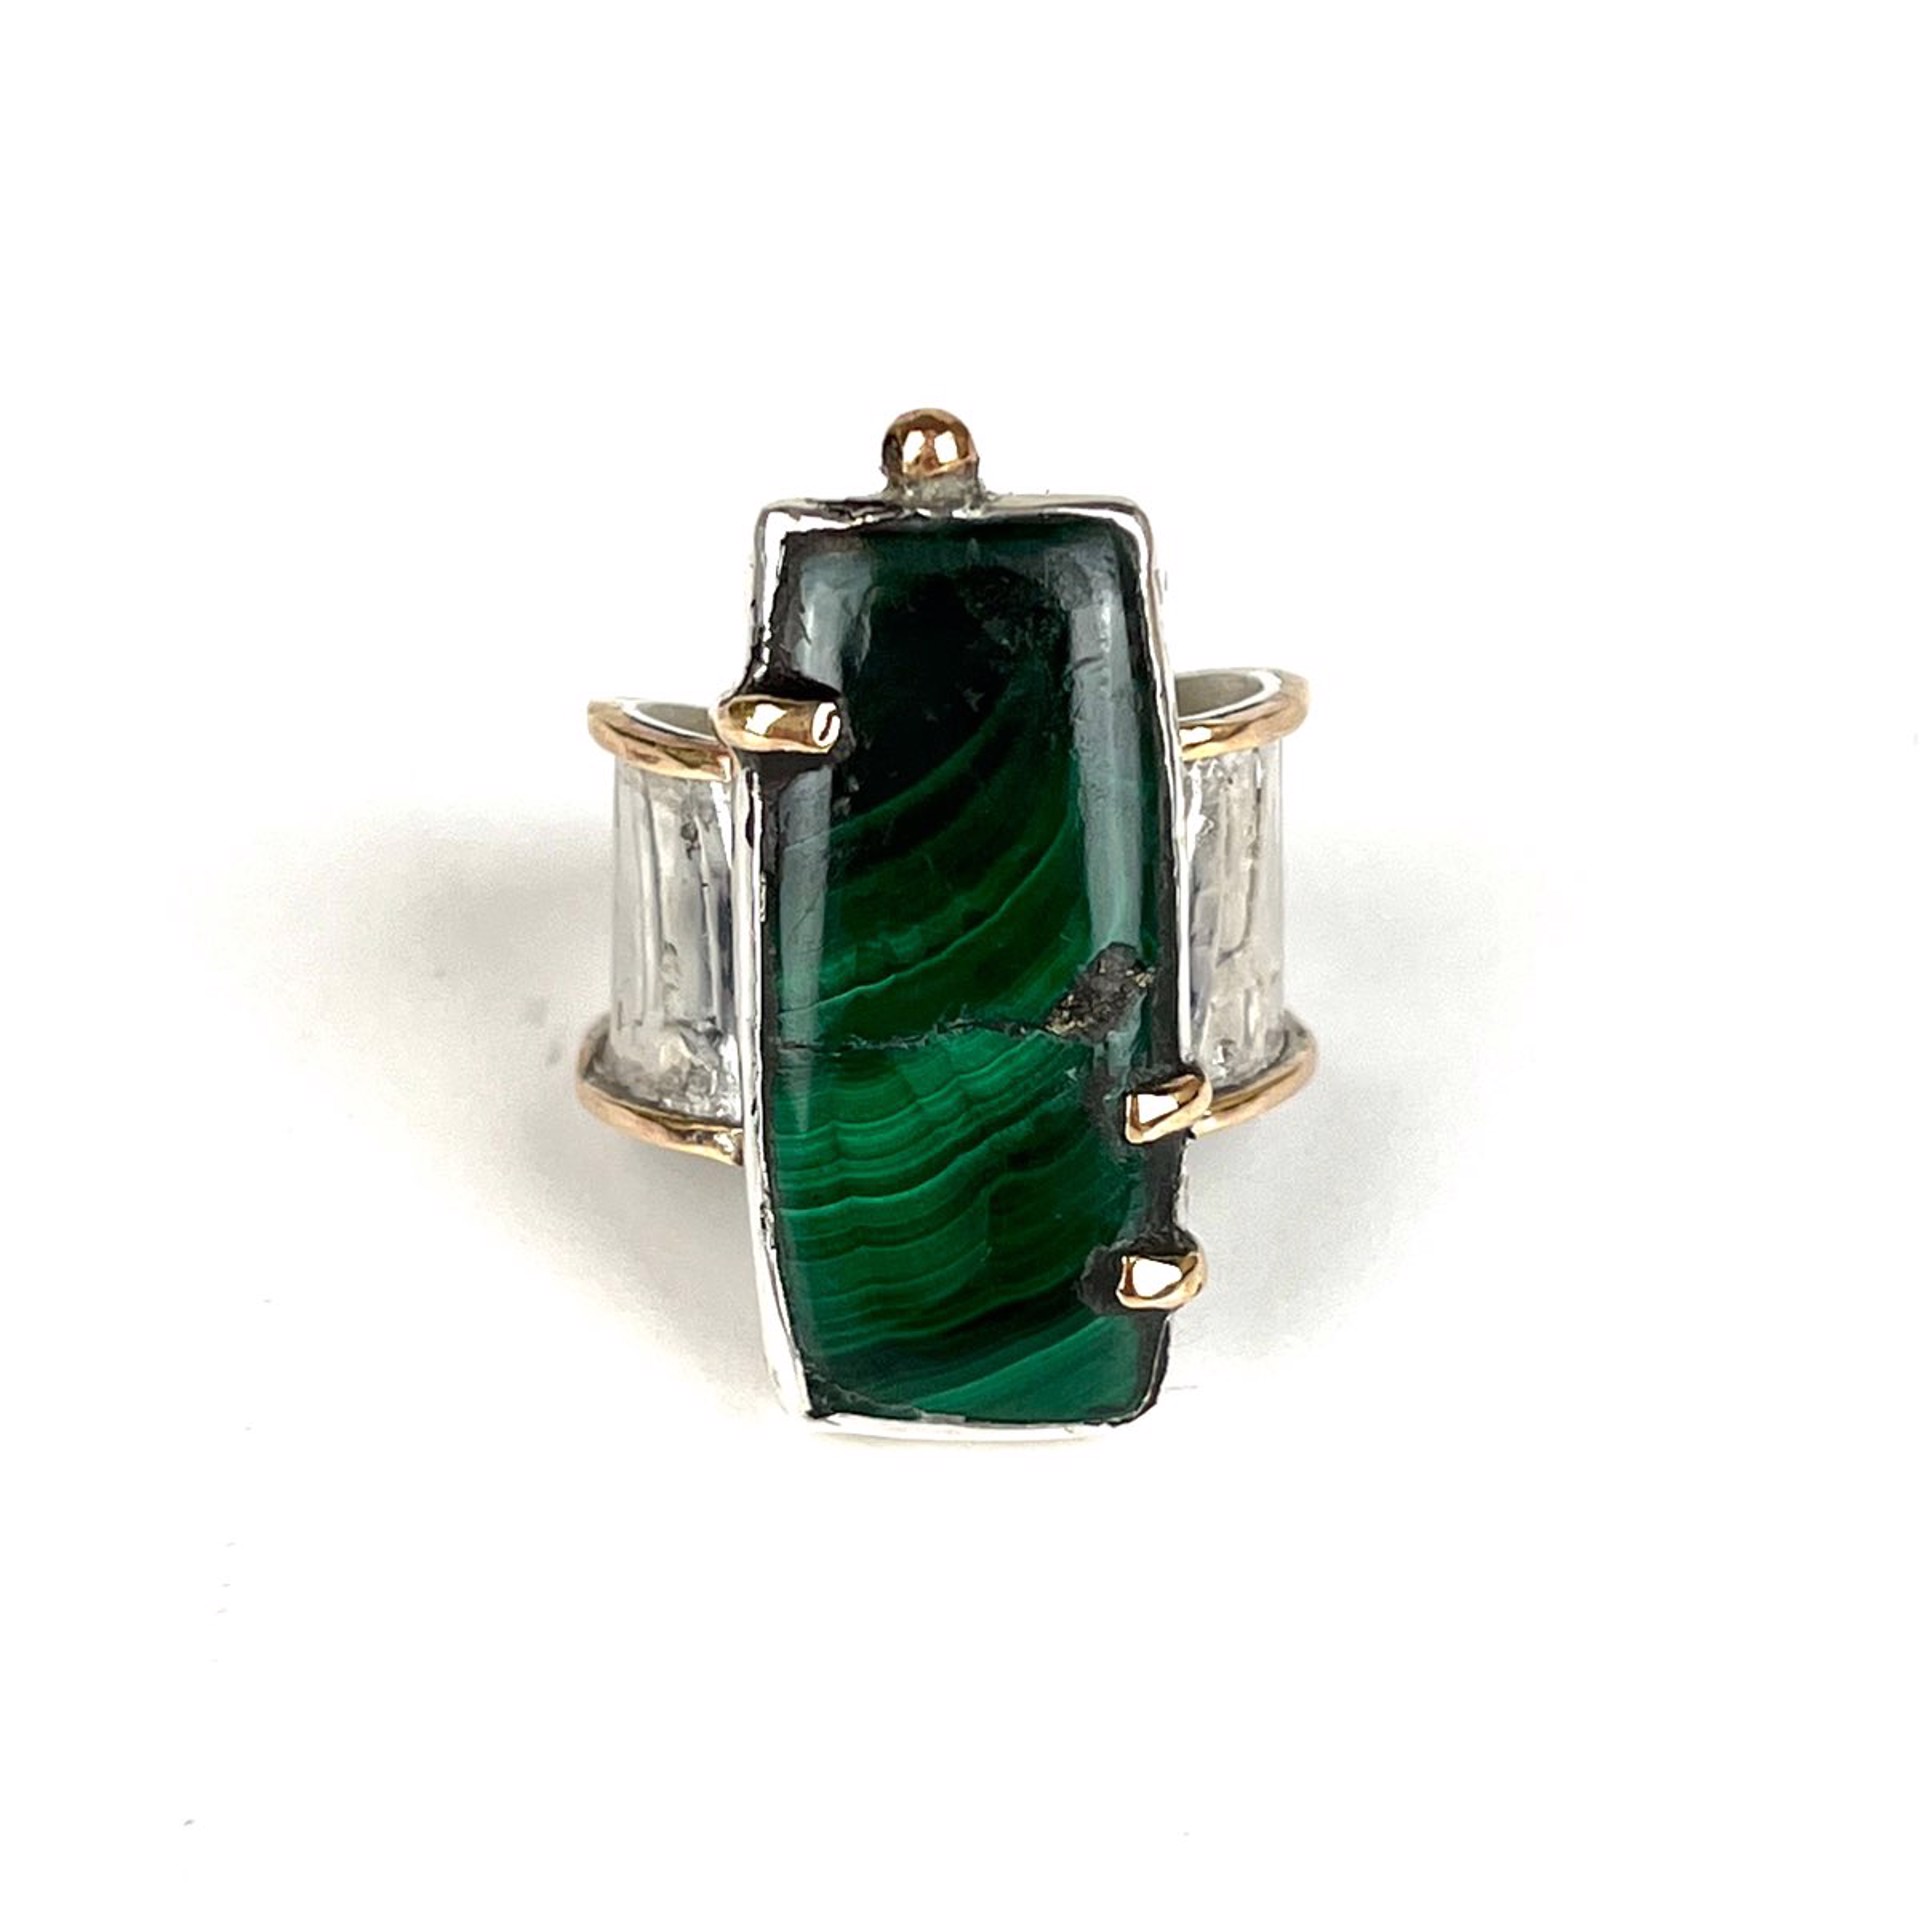 Oblong Malachite in Sterling Silver with 14KGF Trim Ring by Nola Smodic